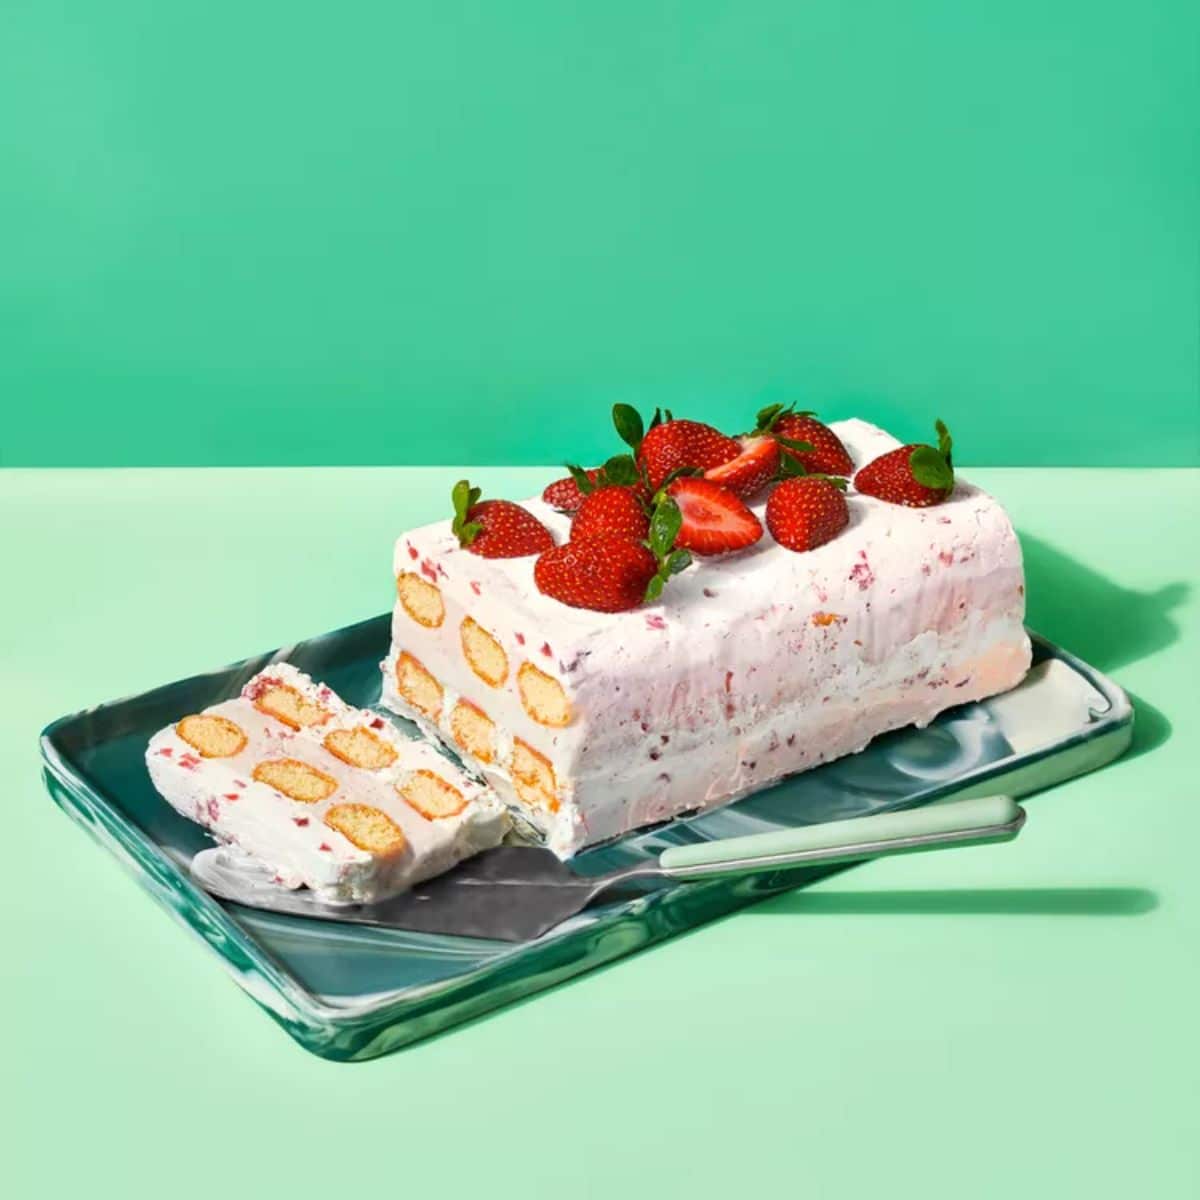 Tasteful strawberry trifle on a metal tray with a spatula.